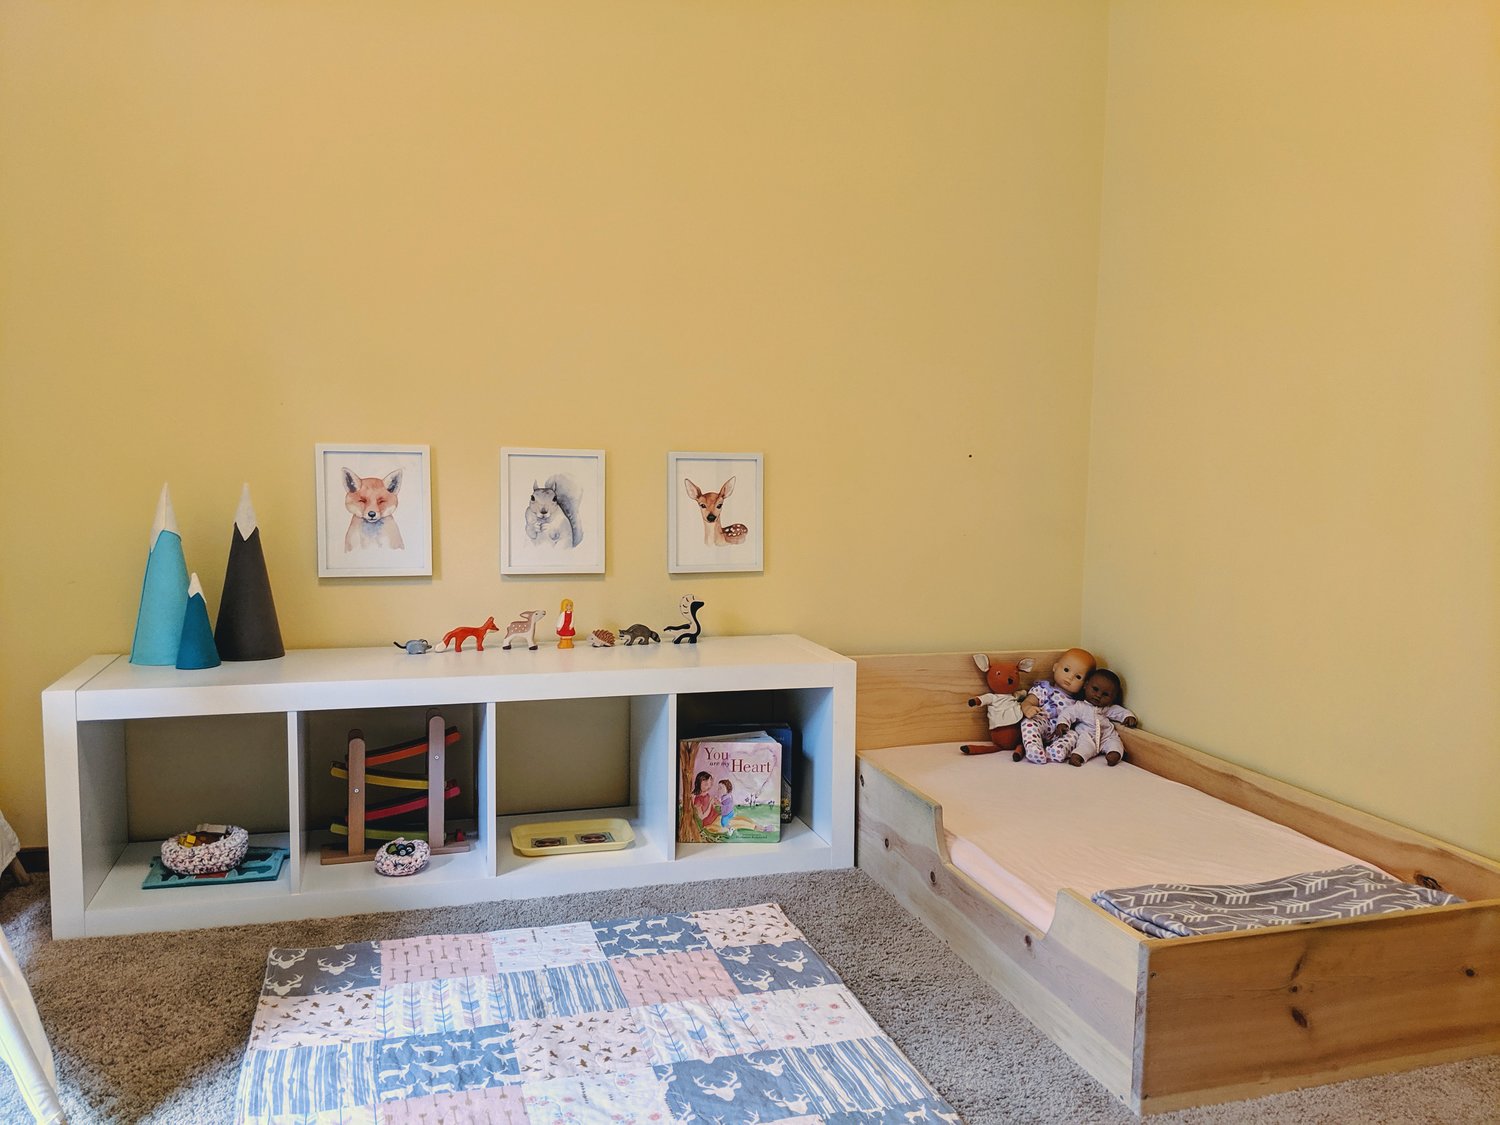 Sleep Self Soothing And The Montessori Floor Bed Montessori In